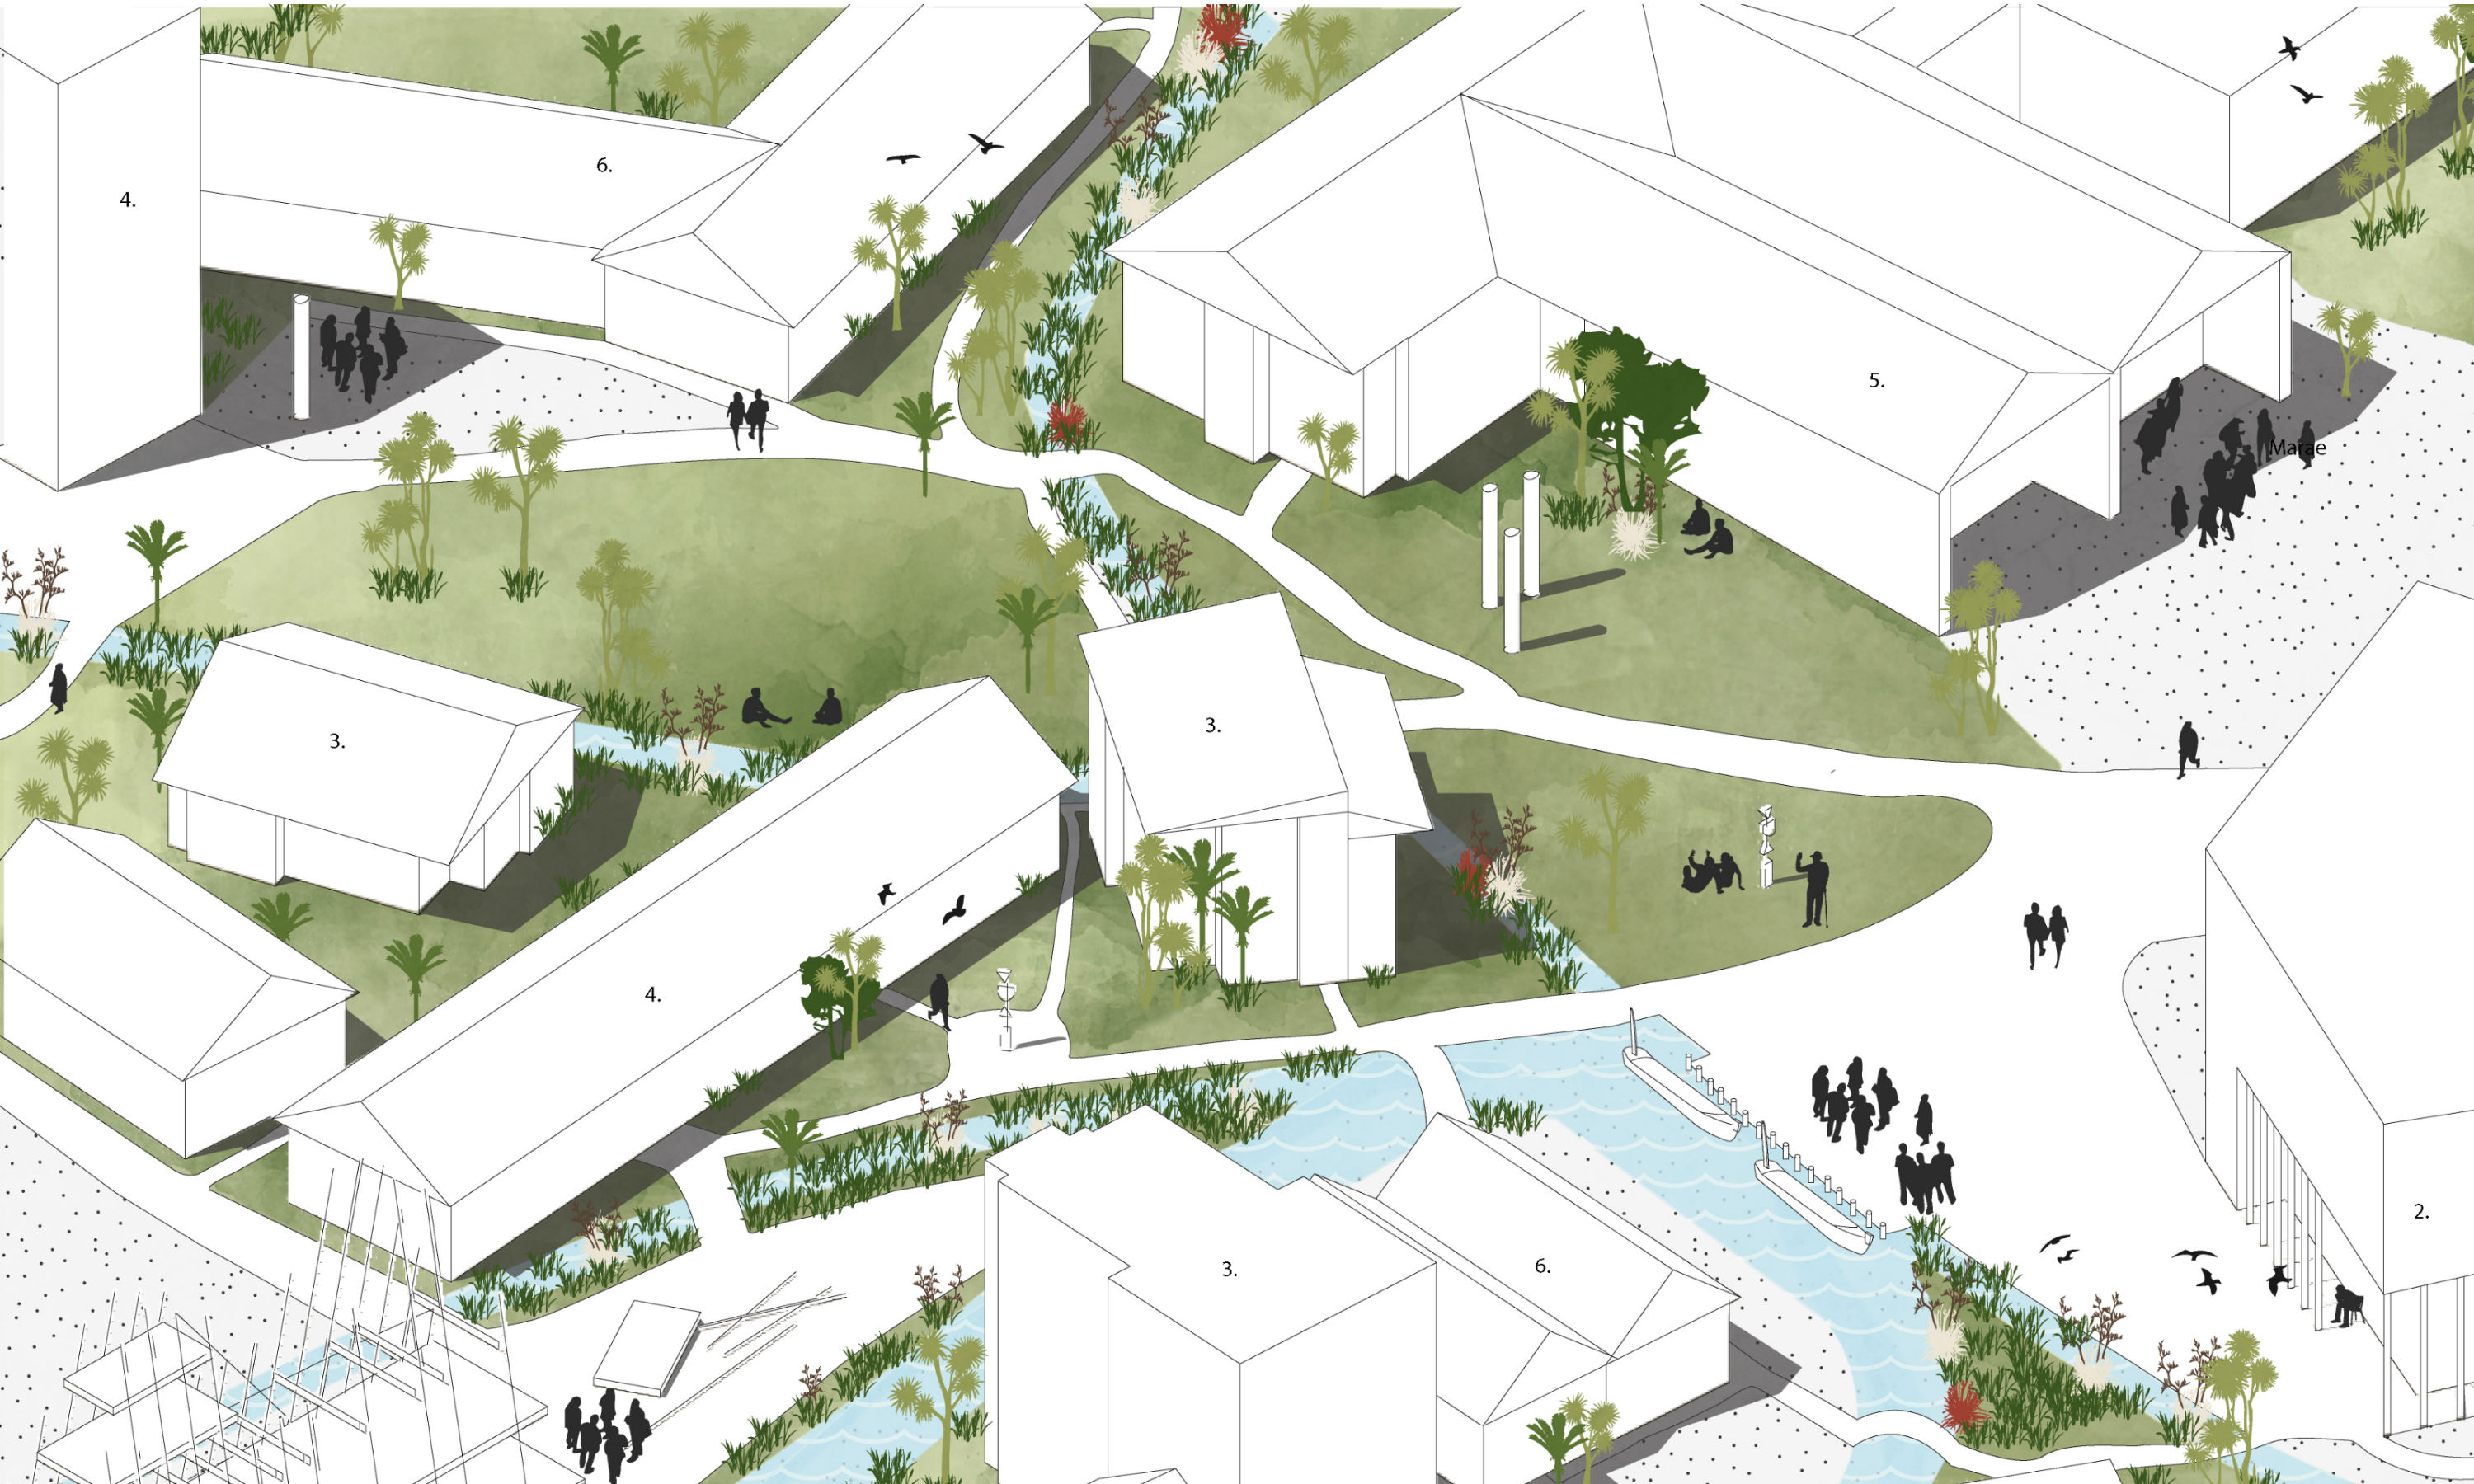 Design of alternative streets in Porirua – an animated image of white buildings and pathways.